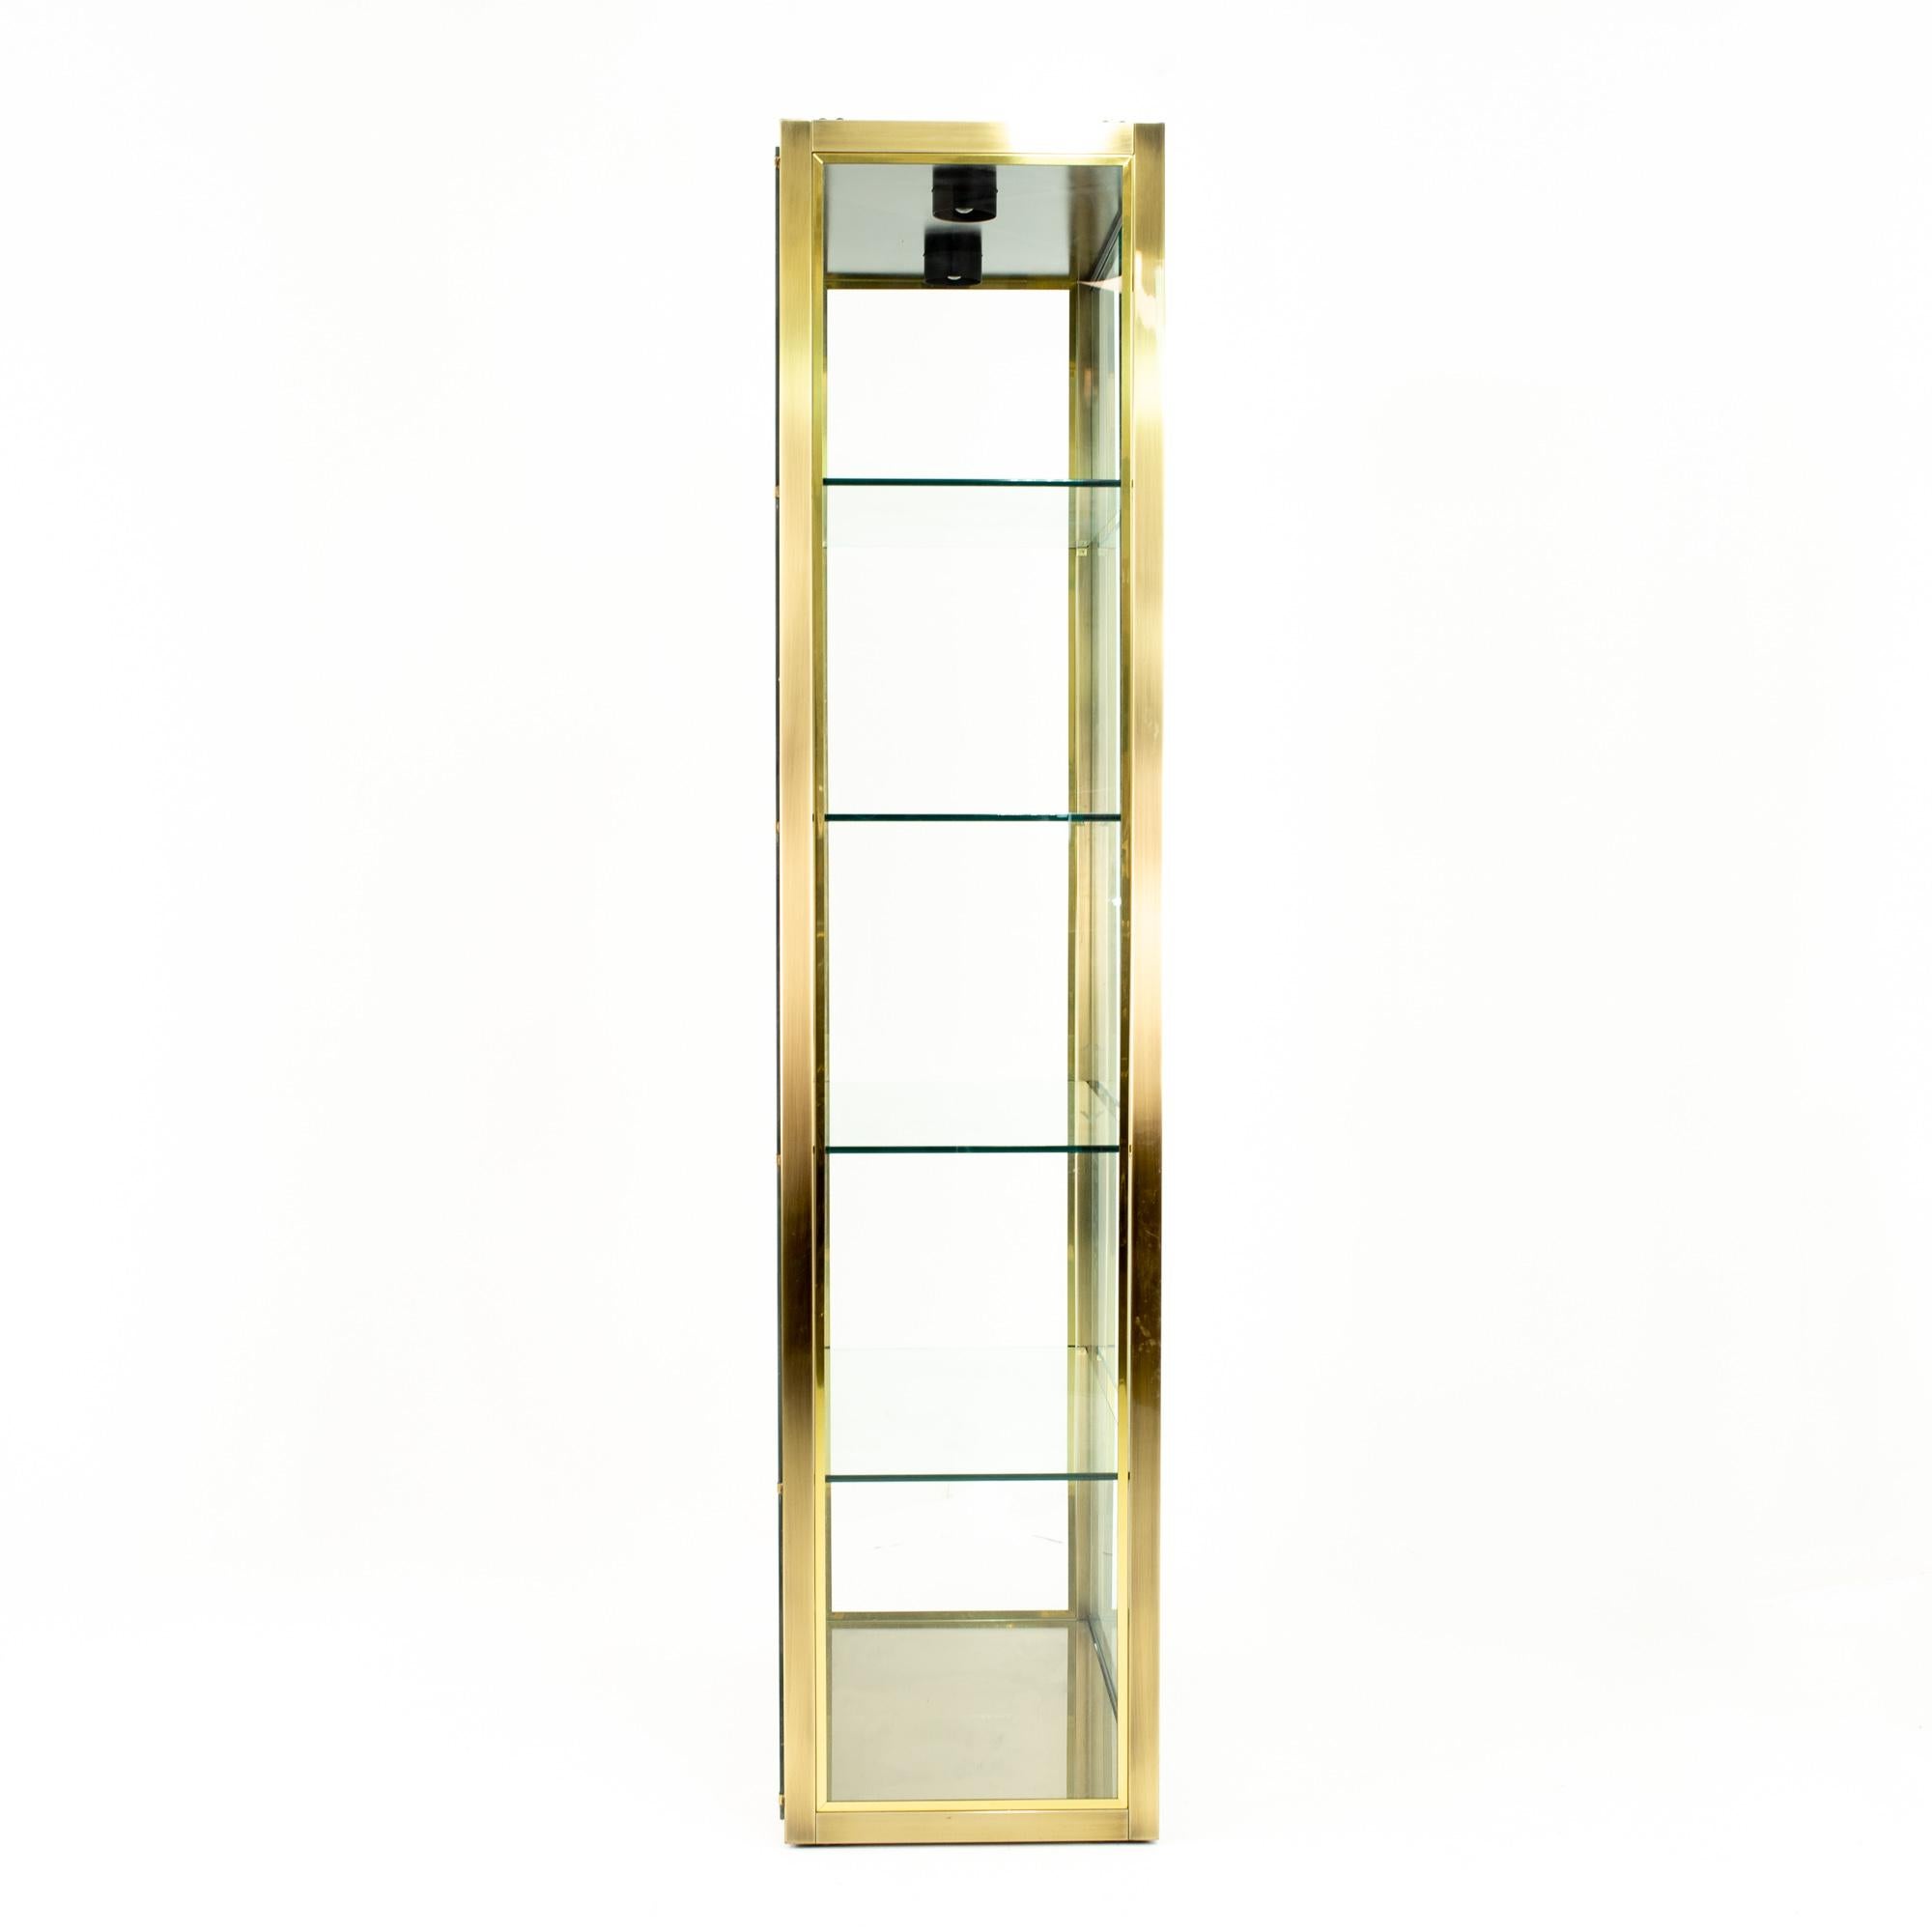 American Design Institute of America Midcentury Brushed Brass and Glass Display Case